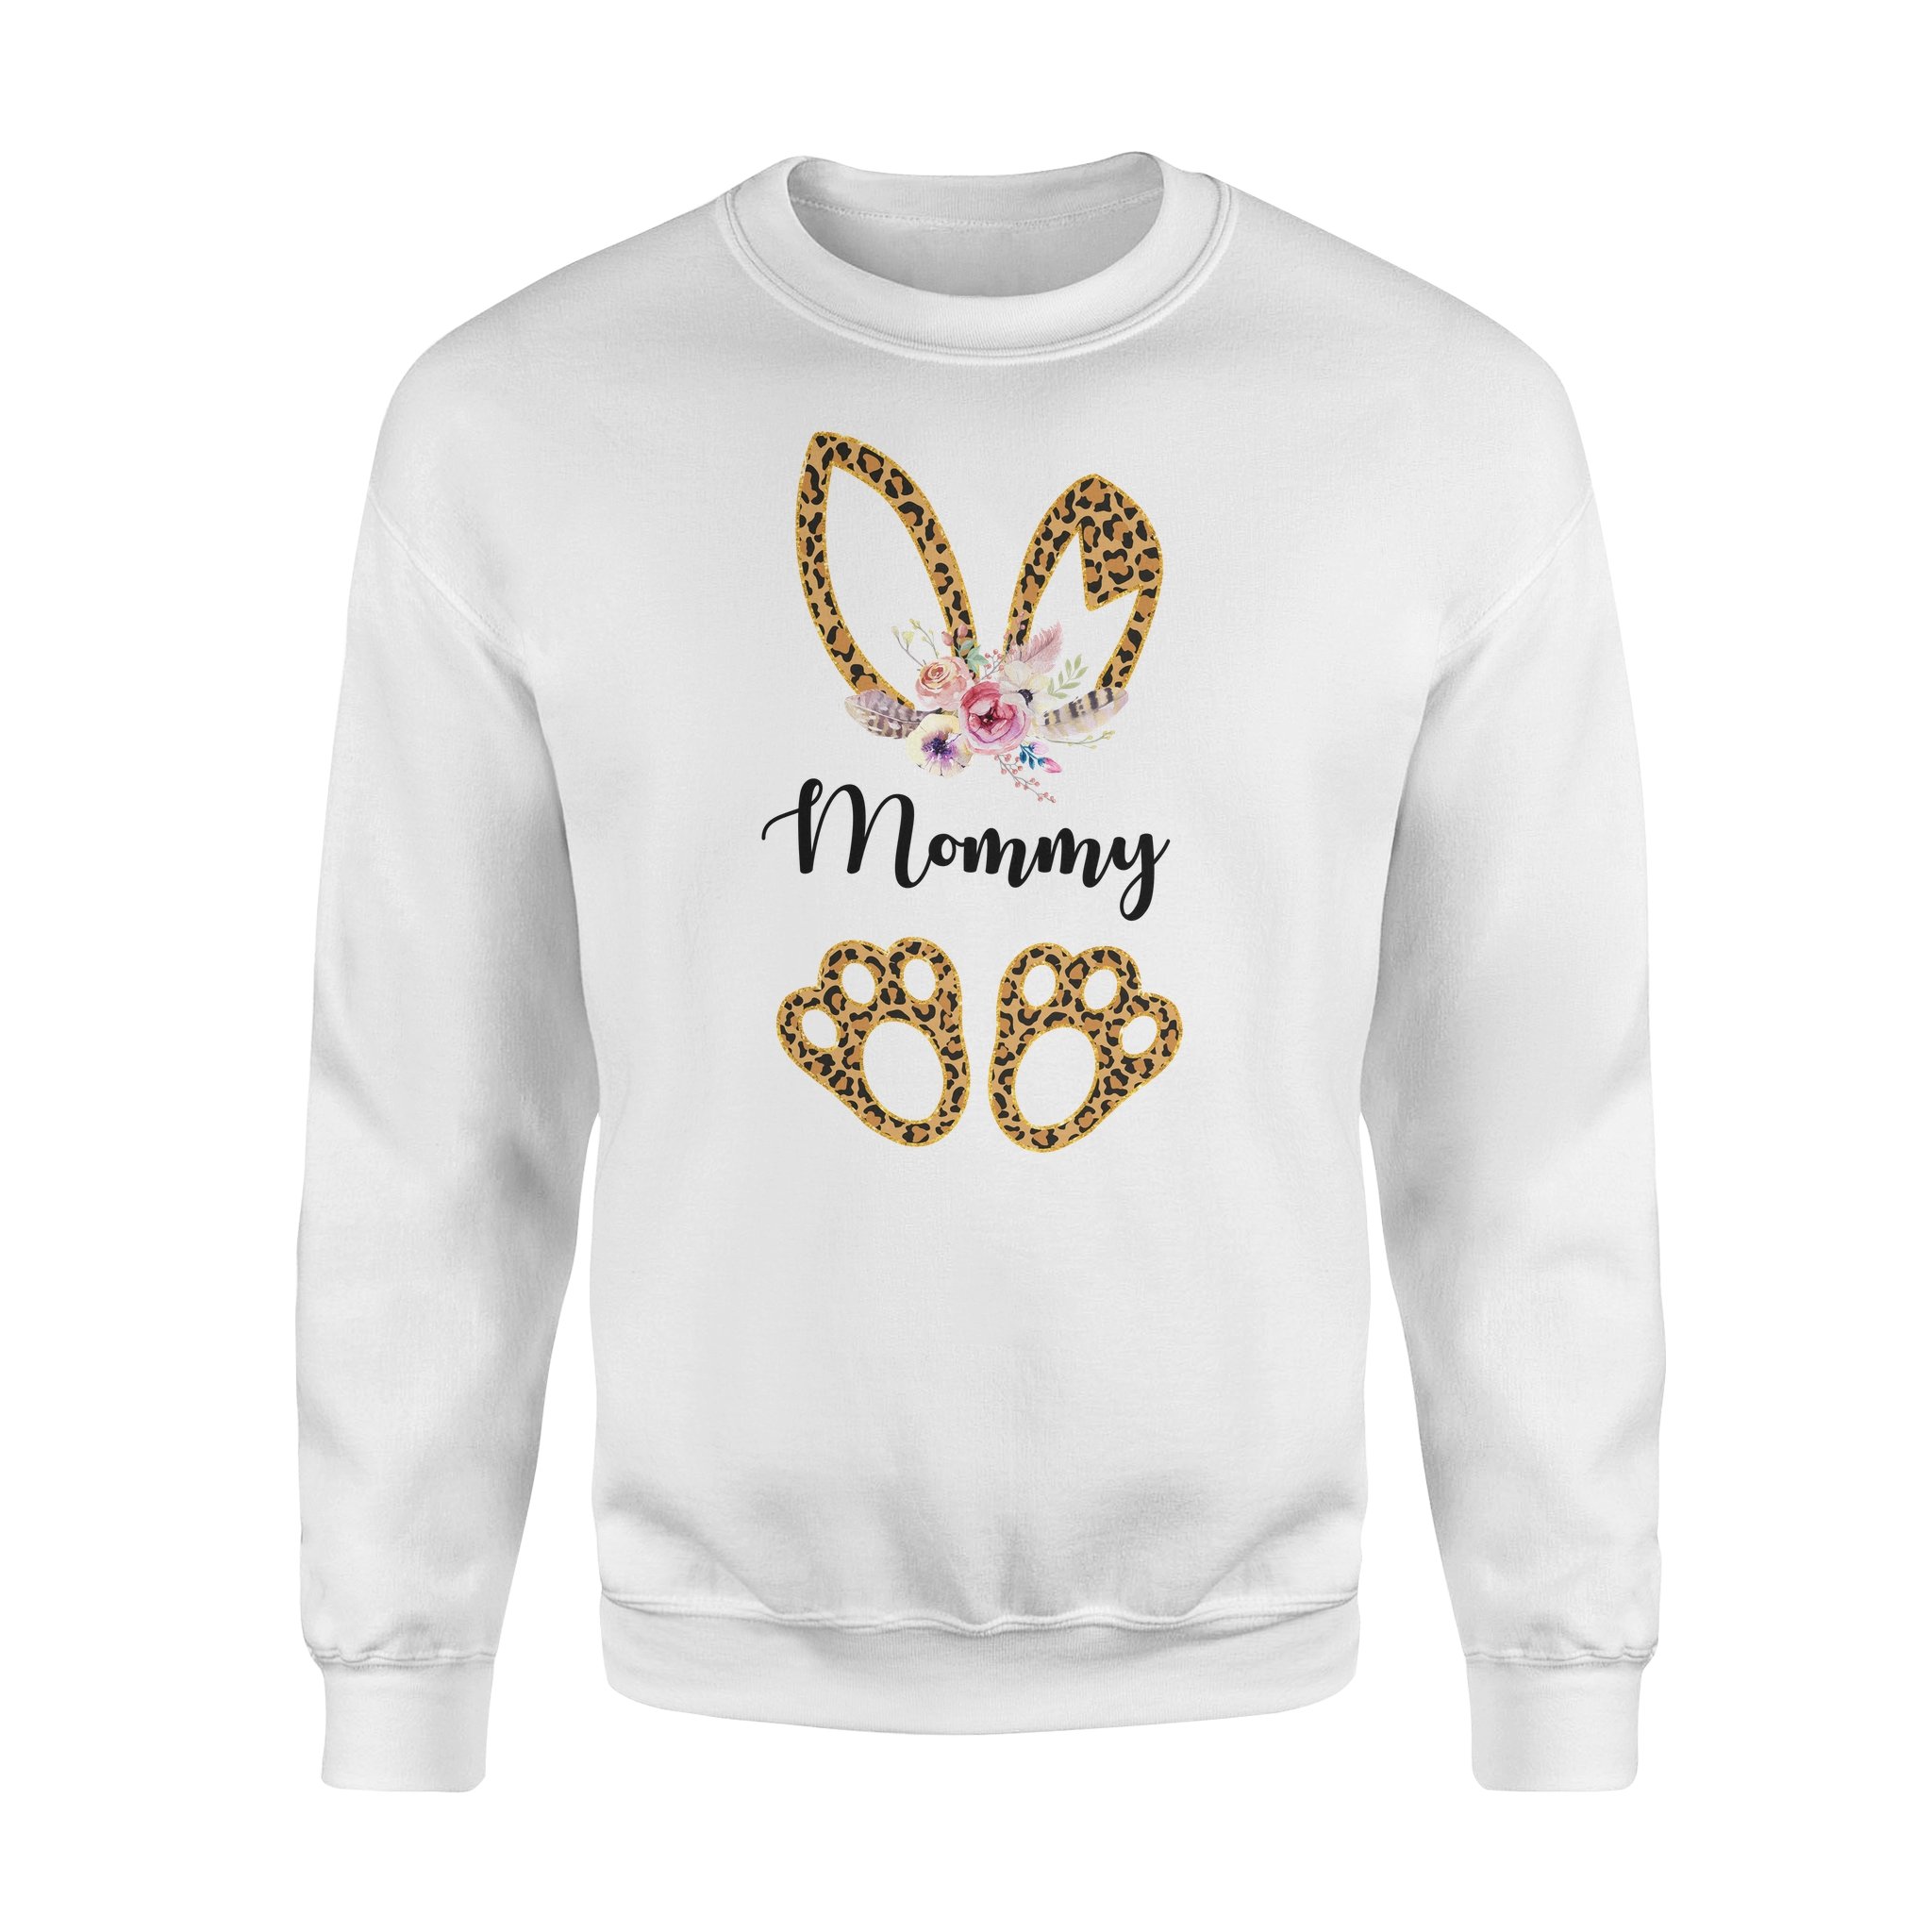 Mommy Bunny Easter Leopard Sweatshirt funny shirts, gift shirts